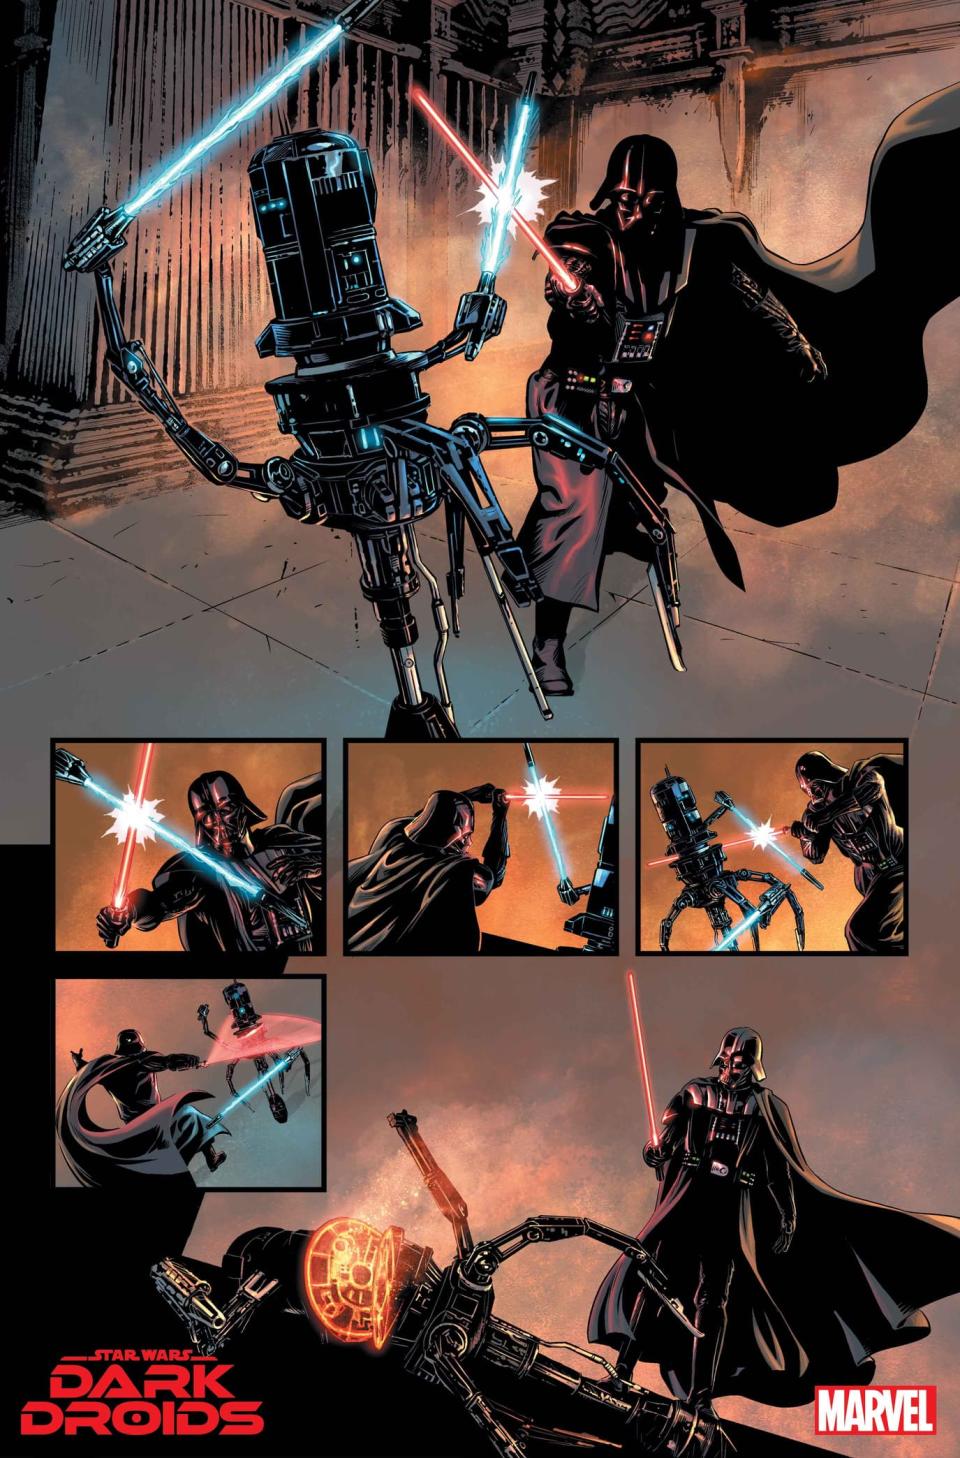 a series of comic book panels showing Darth Vader engaged in lightsaber combat with a droid